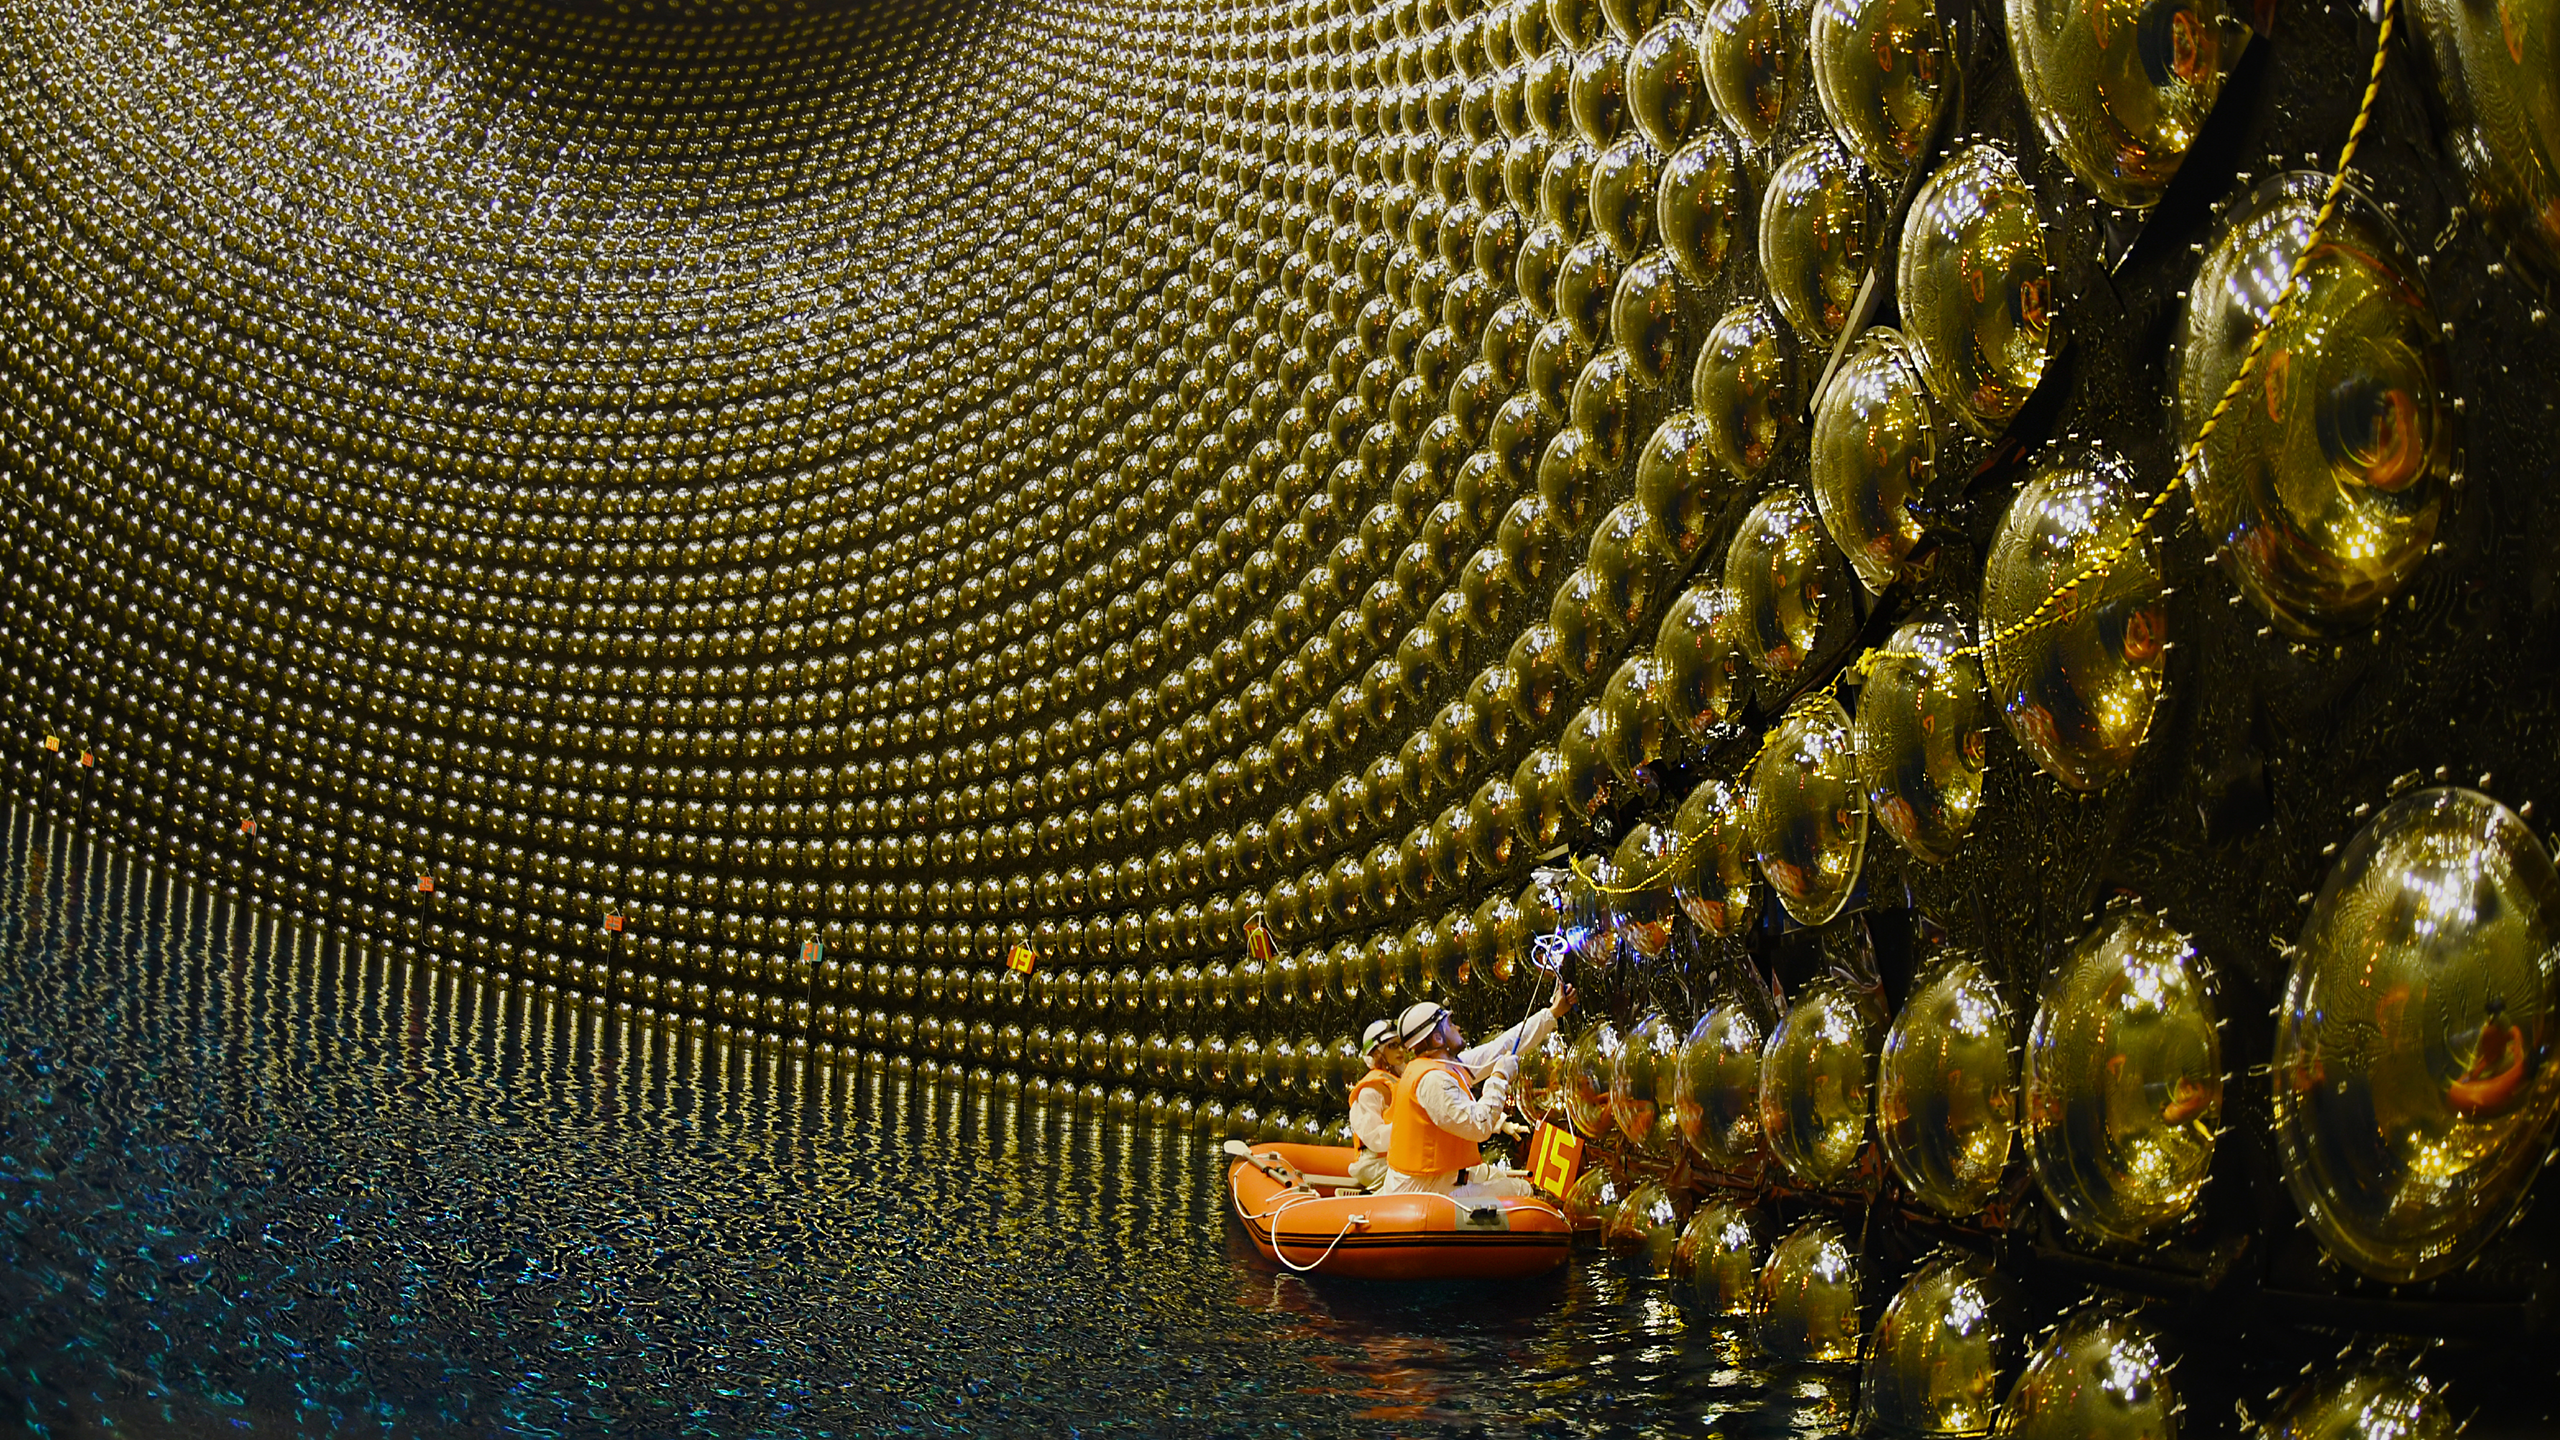 Two scientists work on the reactor from a boat in the water, a huge concave shape with what looks like giant silver balls on the walls